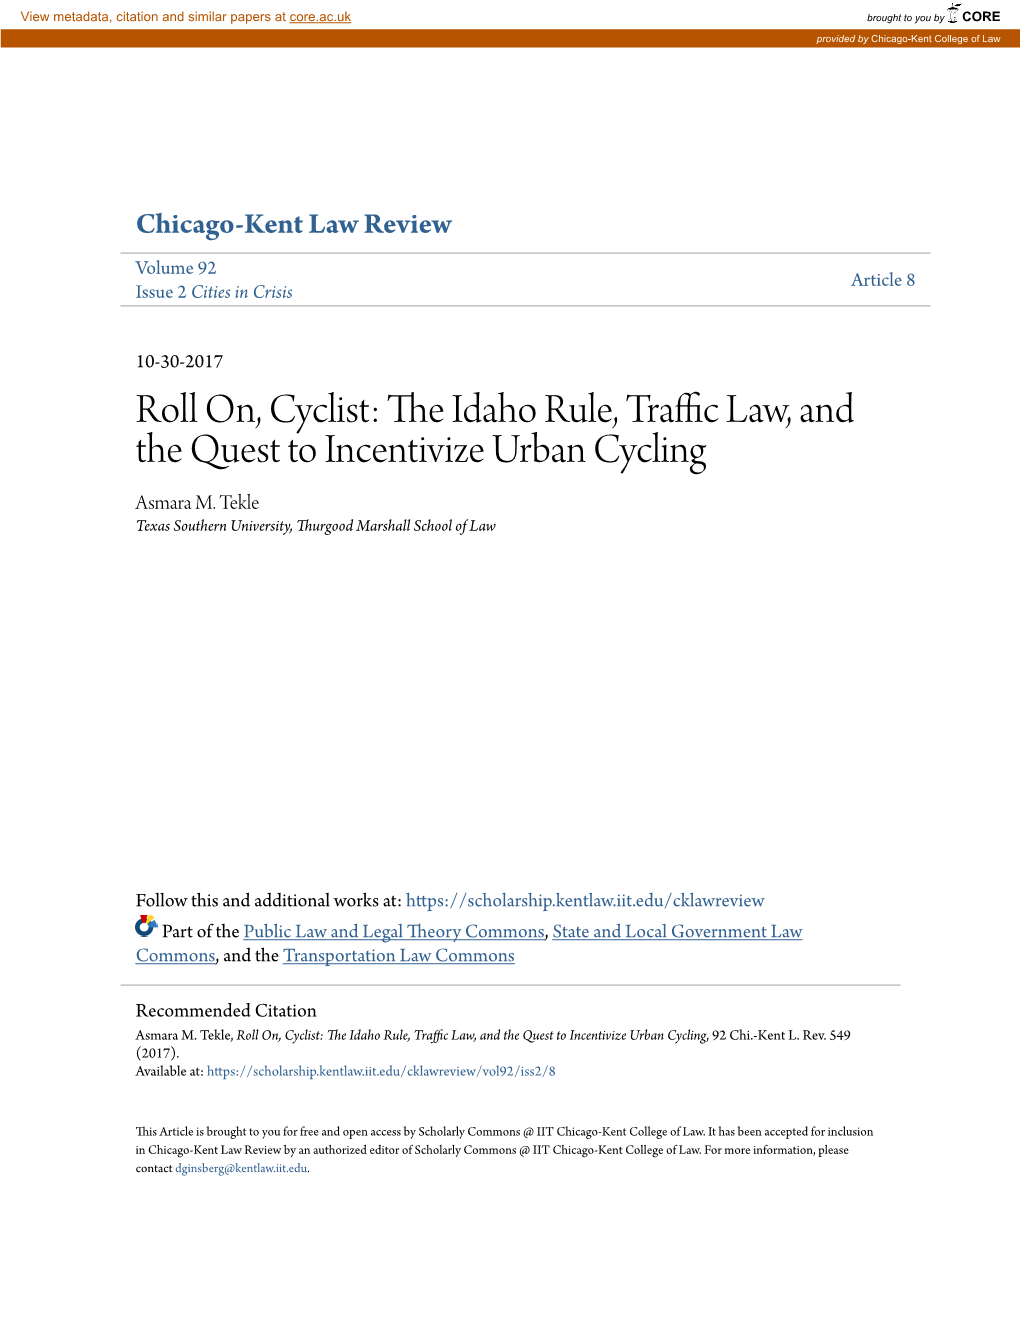 Roll On, Cyclist: the Idaho Rule, Traffic Law, and the Quest To